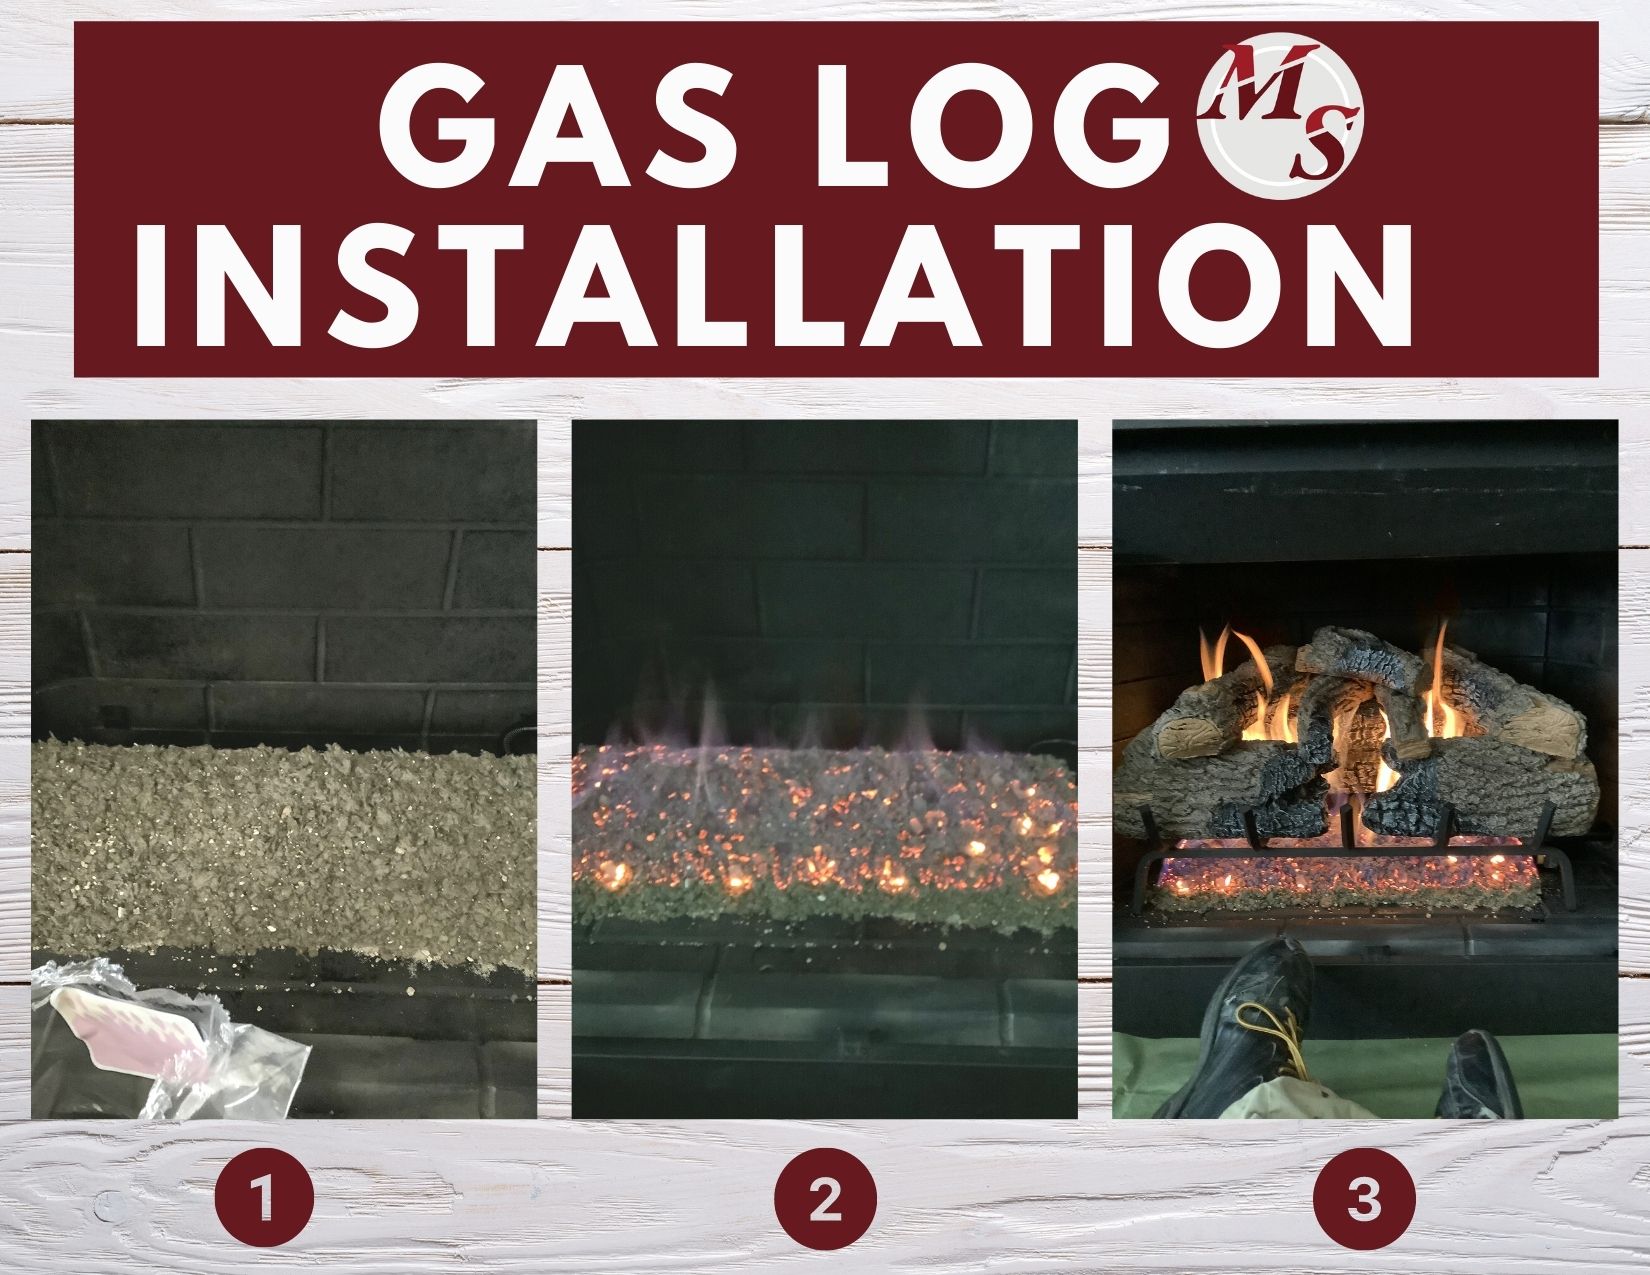 1,2,3 Steps to Installation of Gas Log